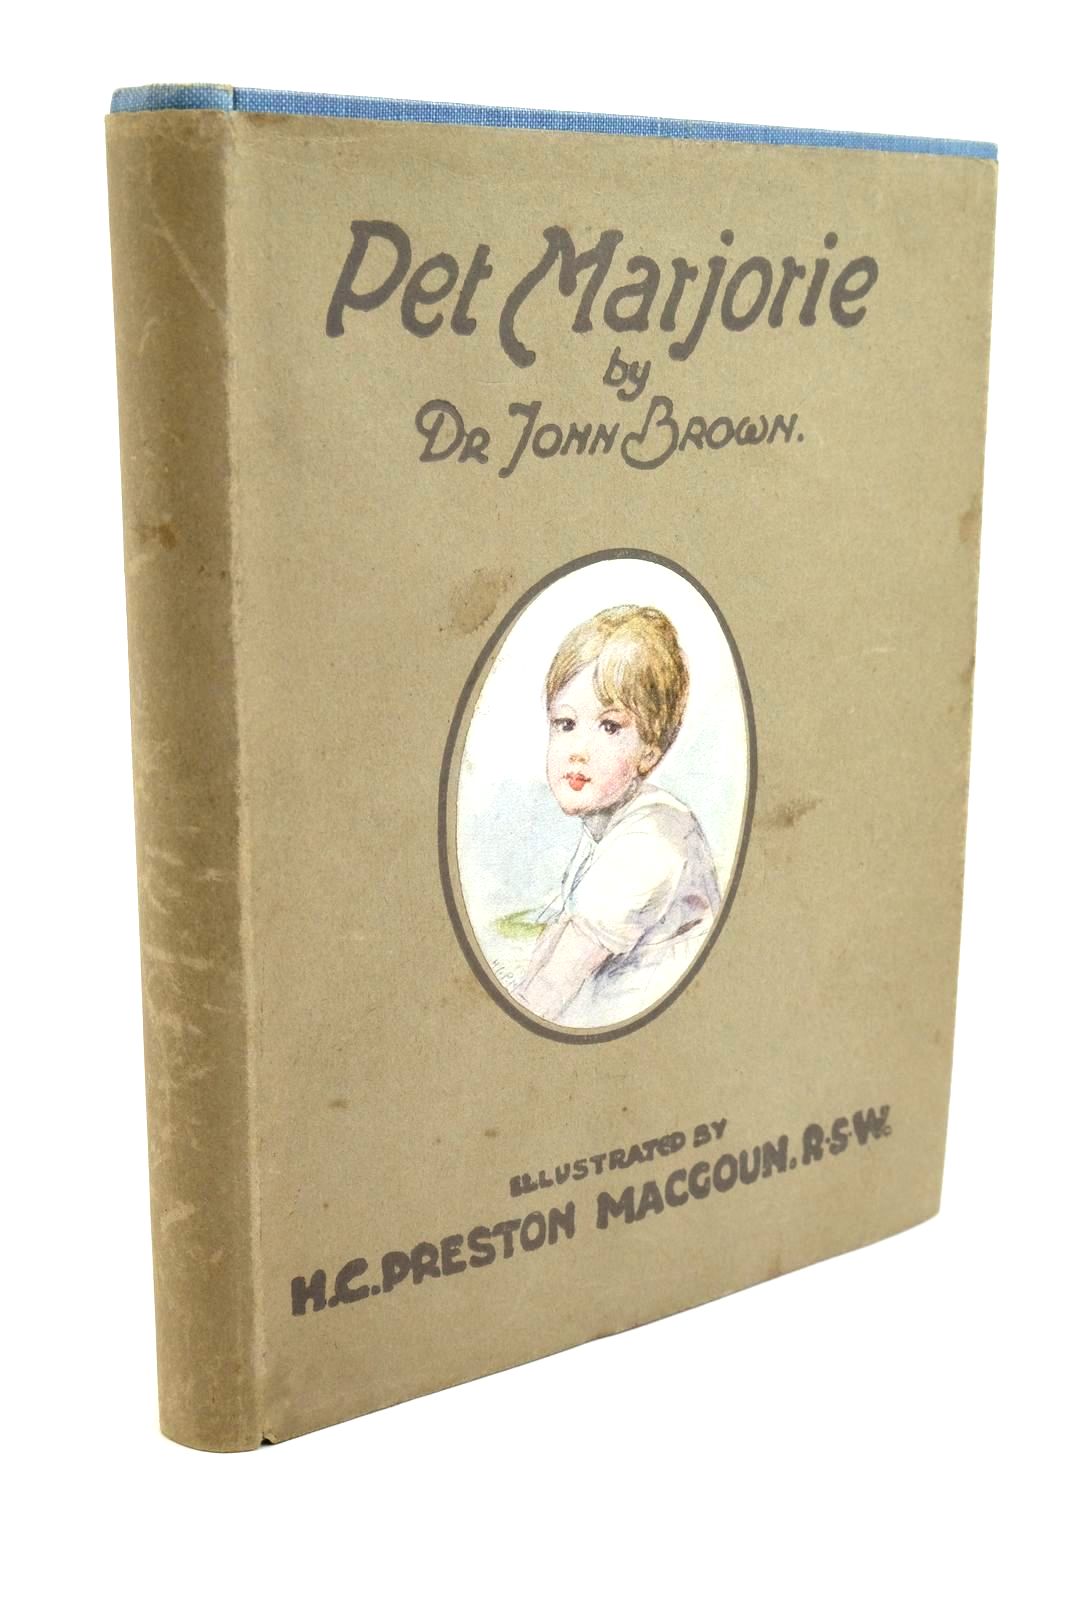 Photo of PET MARJORIE written by Brown, John illustrated by MacGoun, H.C. Preston published by T.N. Foulis (STOCK CODE: 1321765)  for sale by Stella & Rose's Books